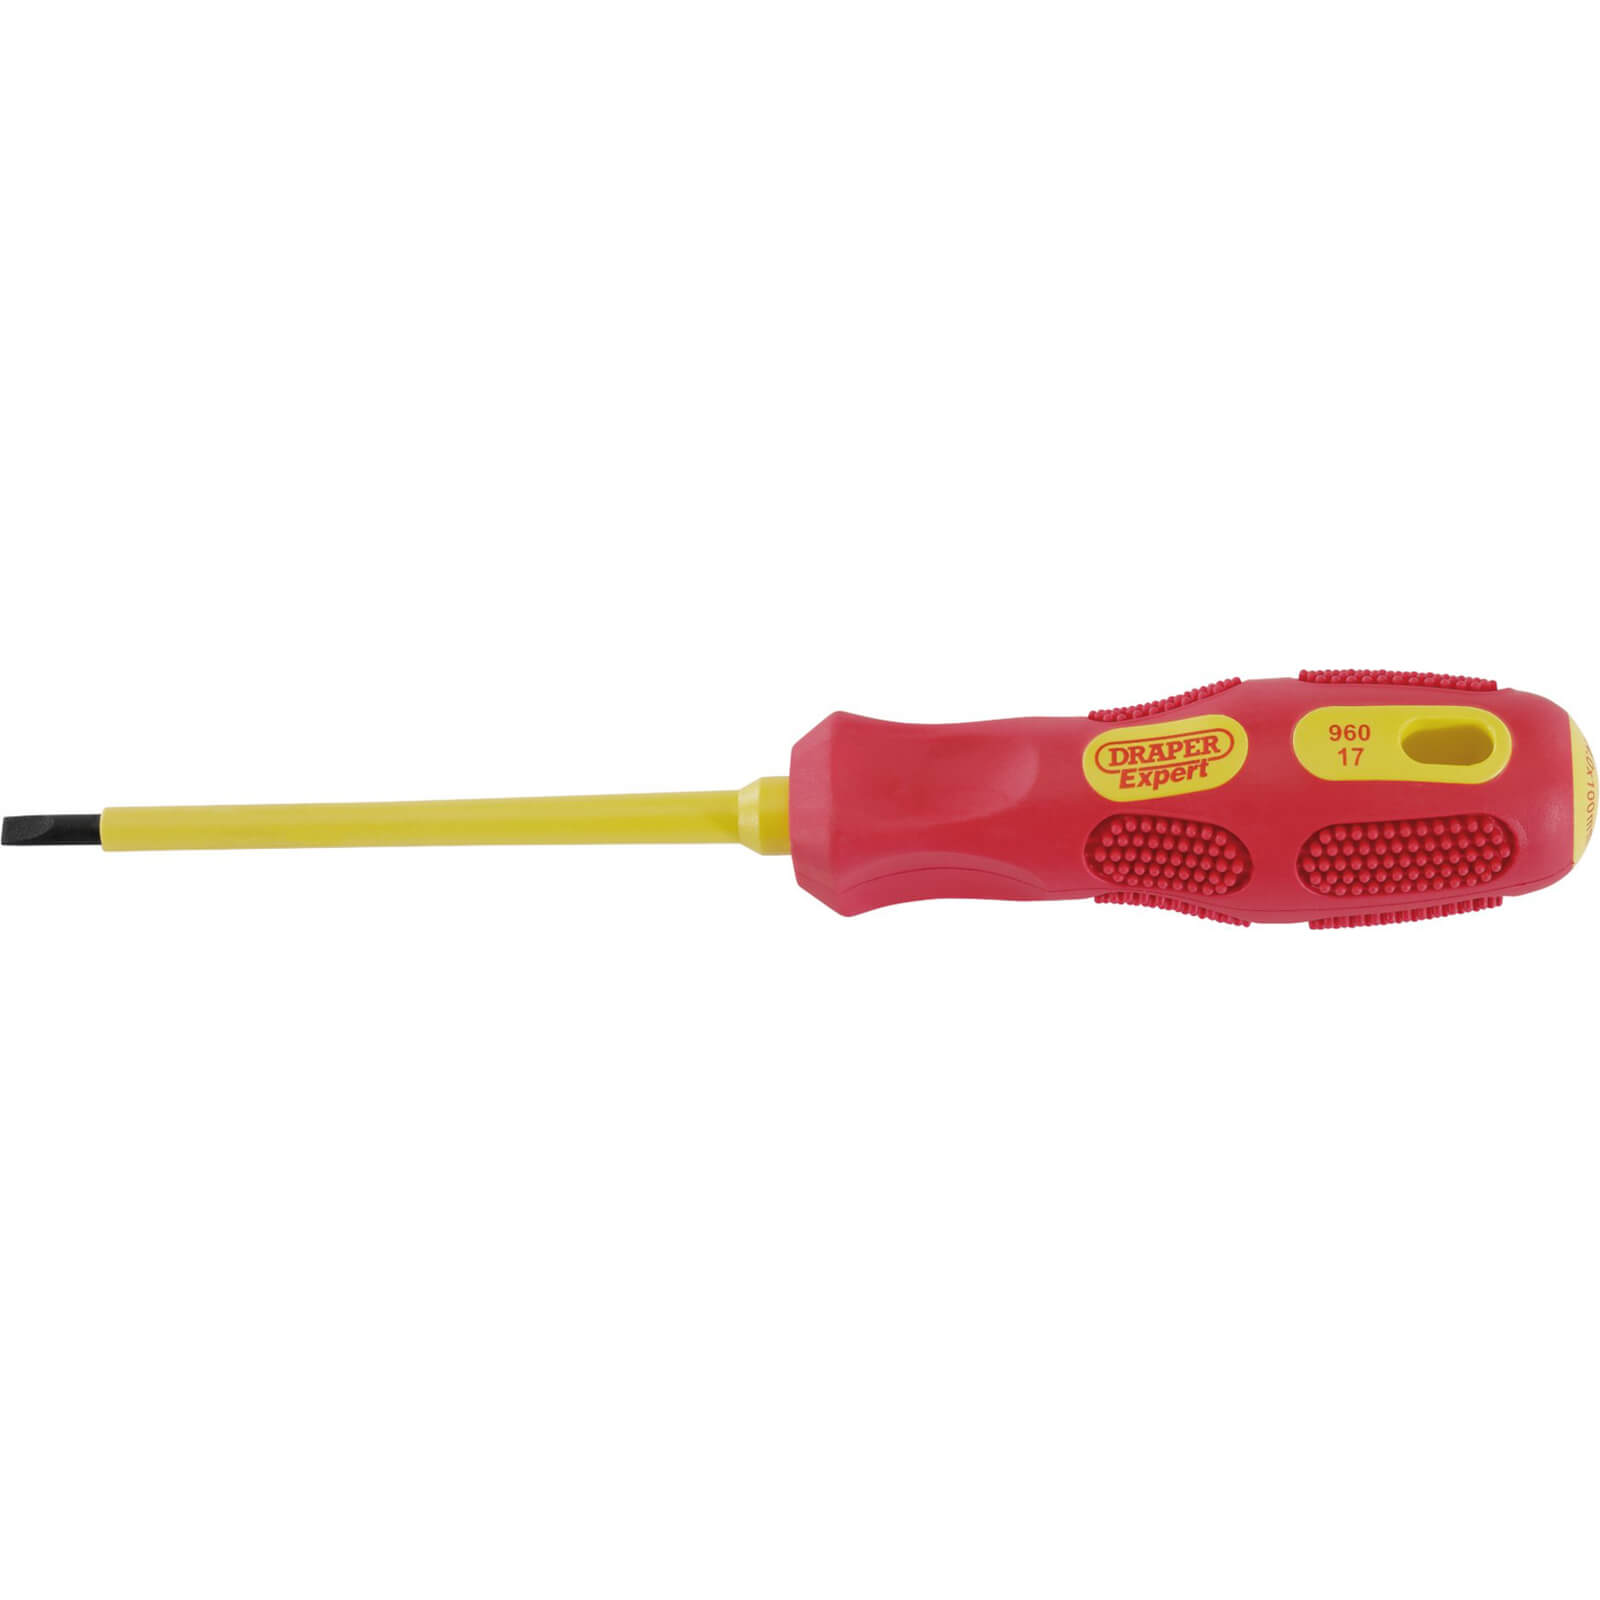 Photo of Draper Expert Vde Insulated Parallel Slotted Screwdriver 4mm 100mm